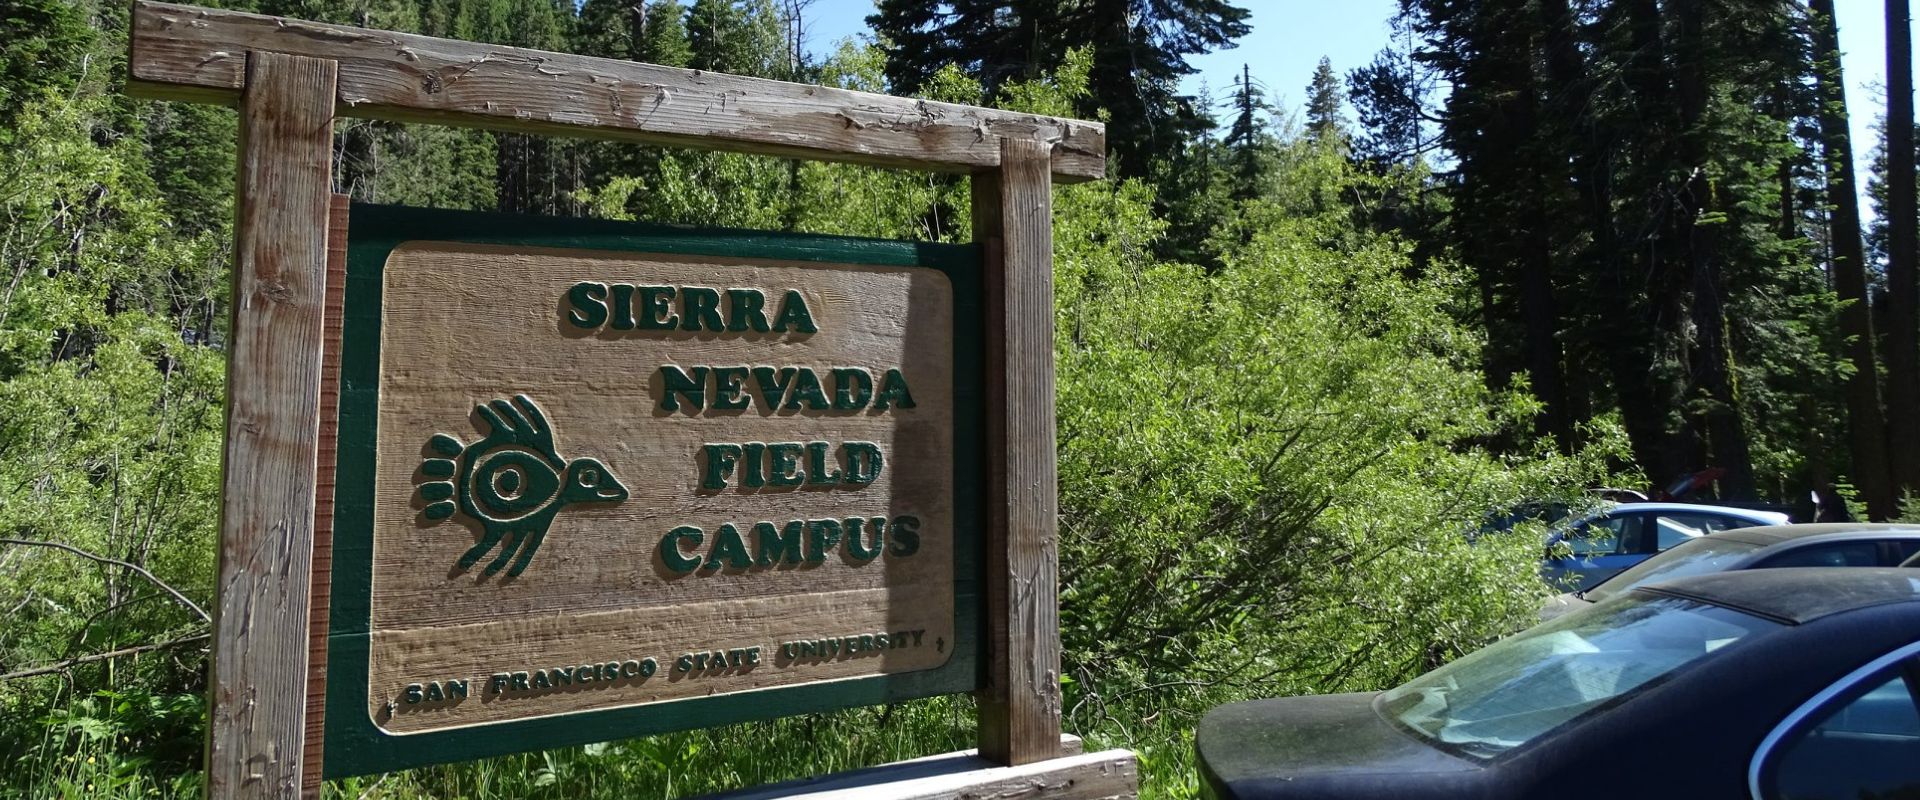 Sign at the entrance to the Sierra Nevada Field Campus